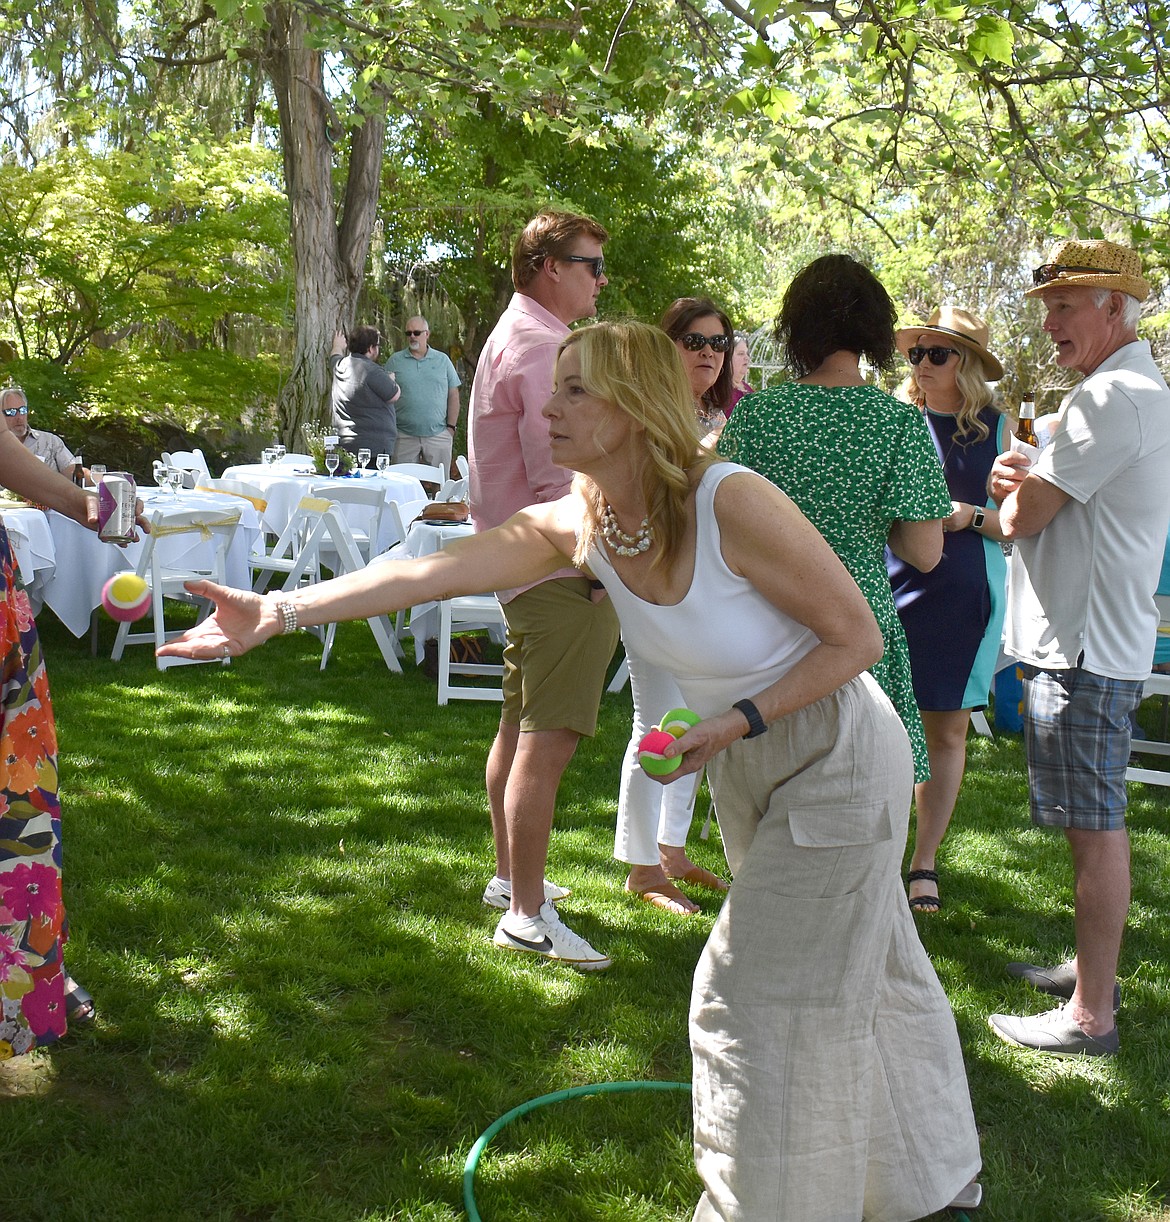 Columbia Basin Allied Arts board member Leslie Ramsden tosses a velcro ball at a target for a chance at a drawing to win a diamond bracelet at the CBAA Garden Party Saturday.